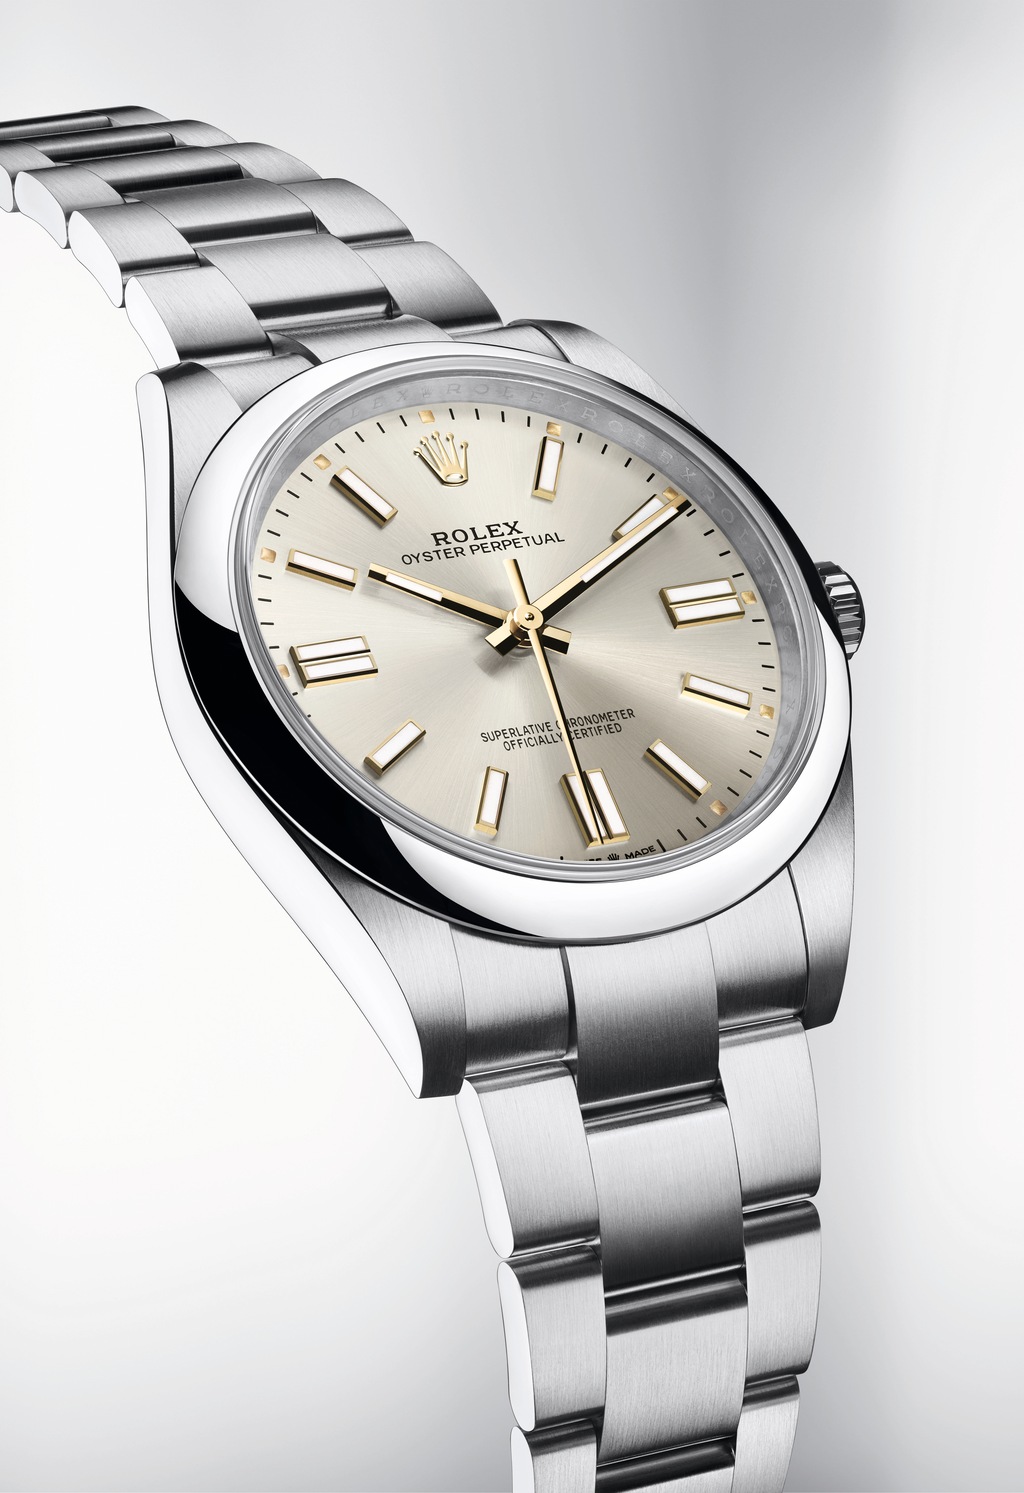 Rolex Oyster Perpetual new models 2020